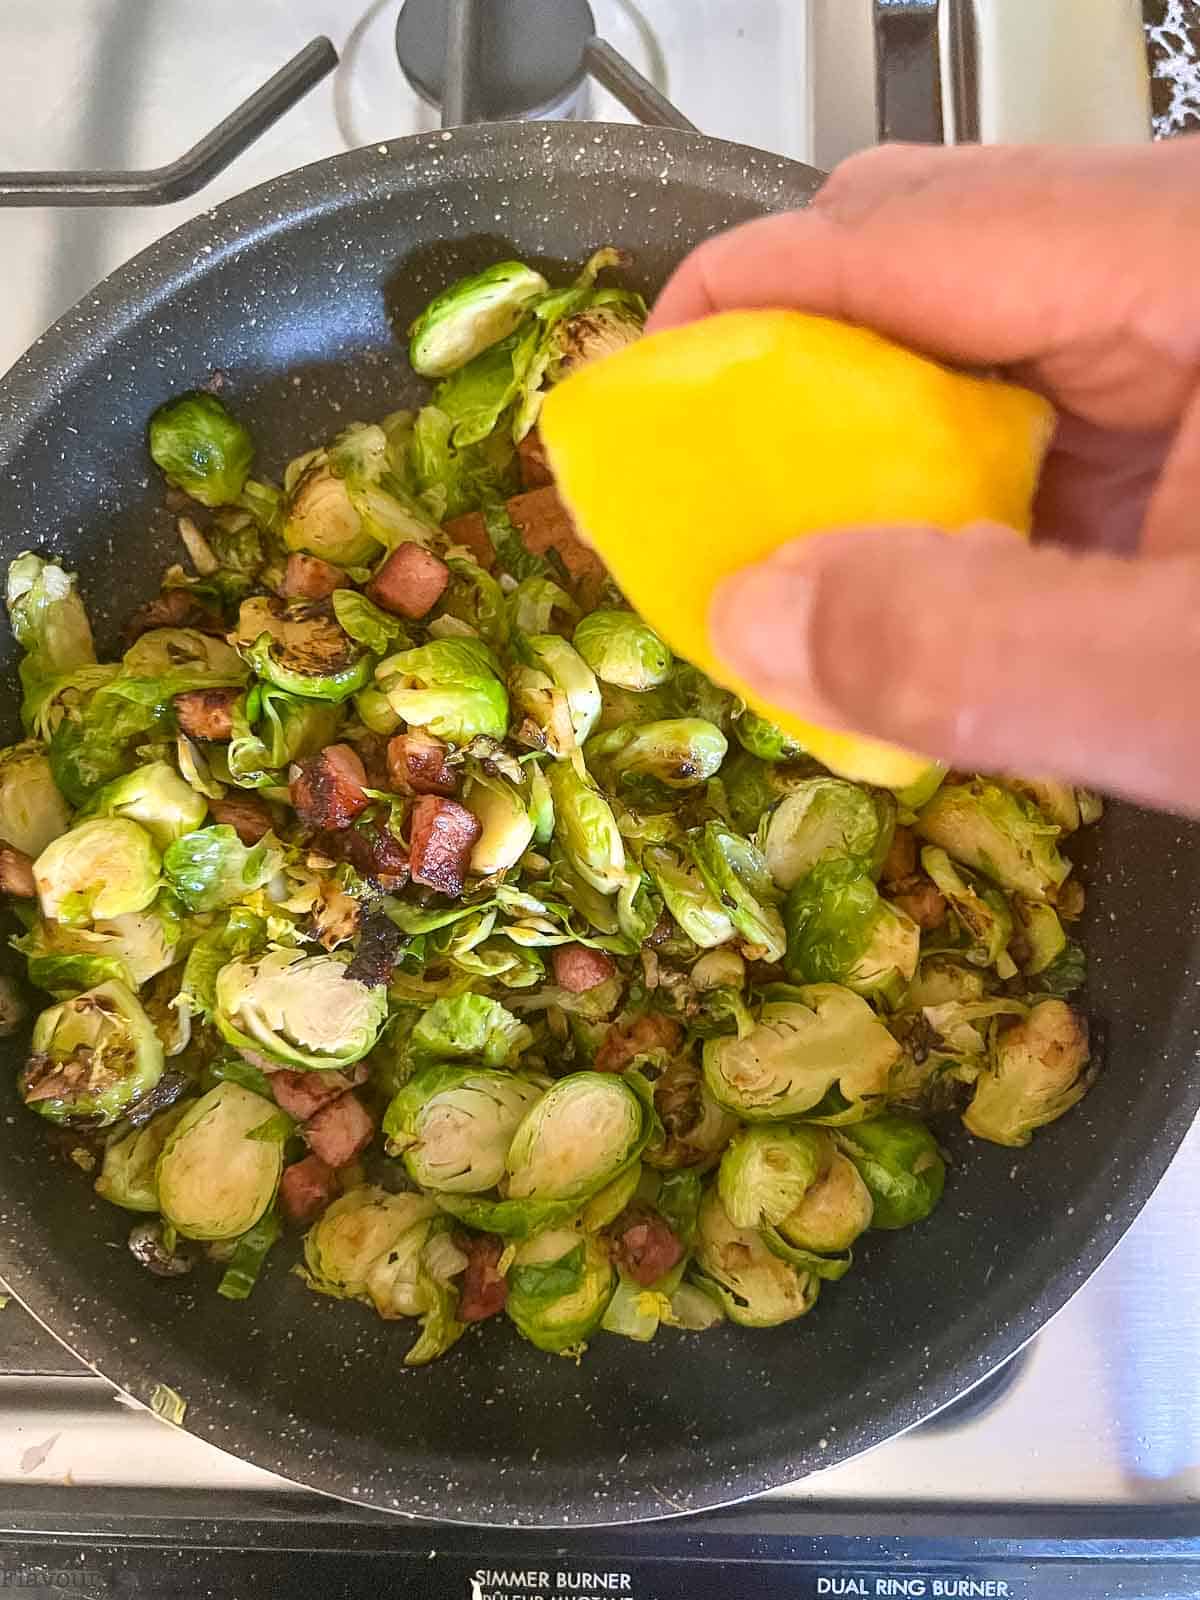 Squeezing fresh lemon juice on sautéed Brussels sprouts and pancetta in a skillet.